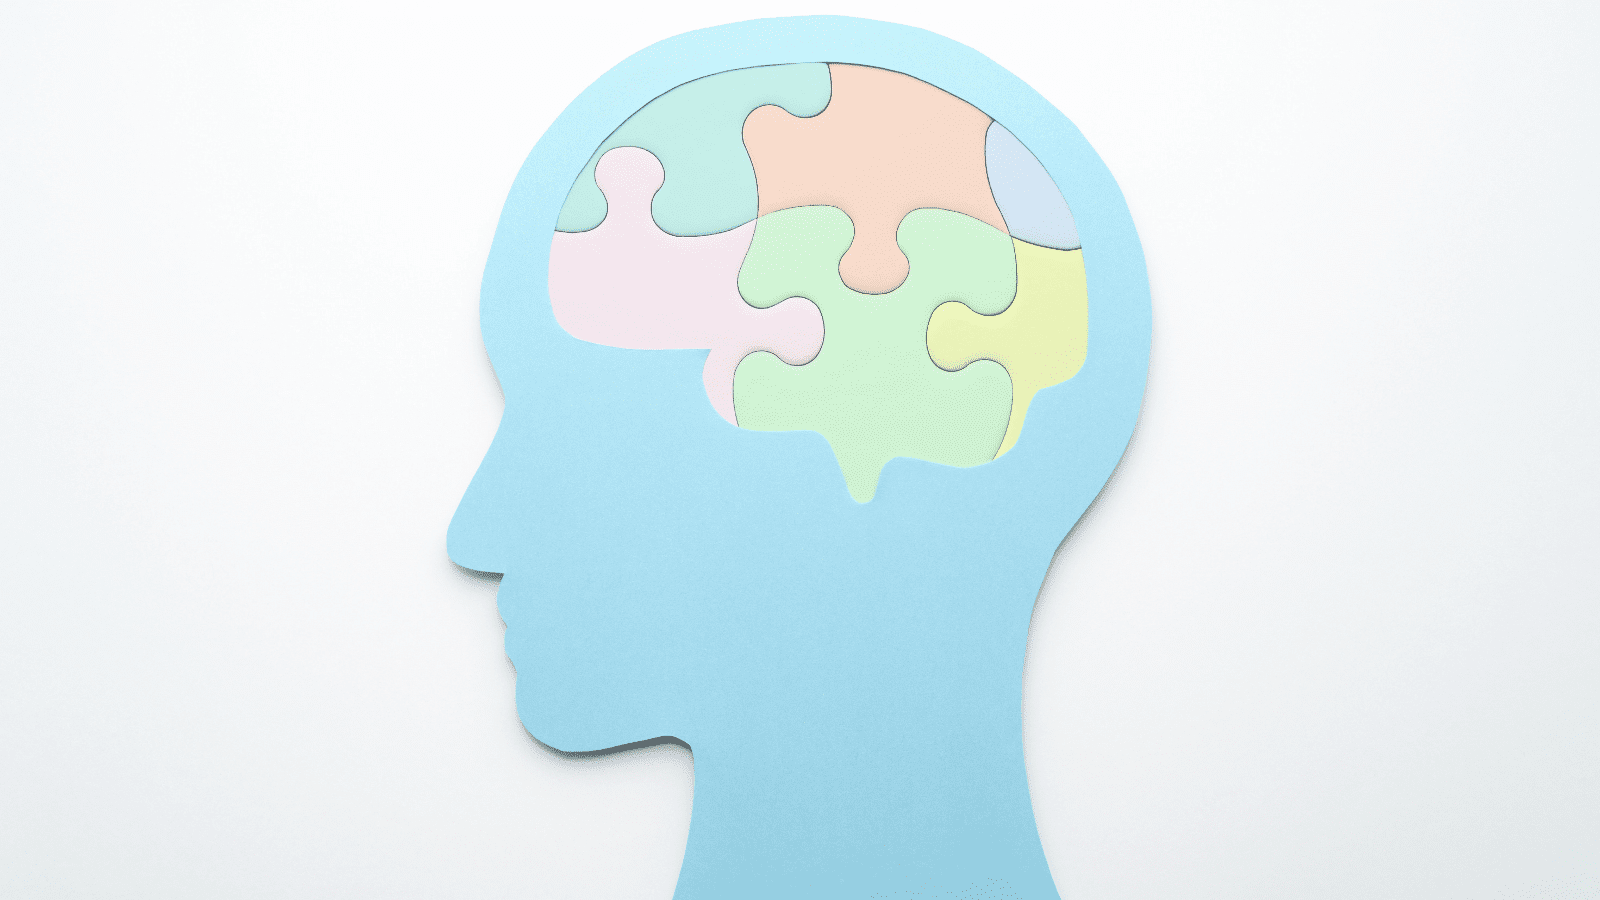 Dispelling Misconceptions: Key Facts About Mental Health